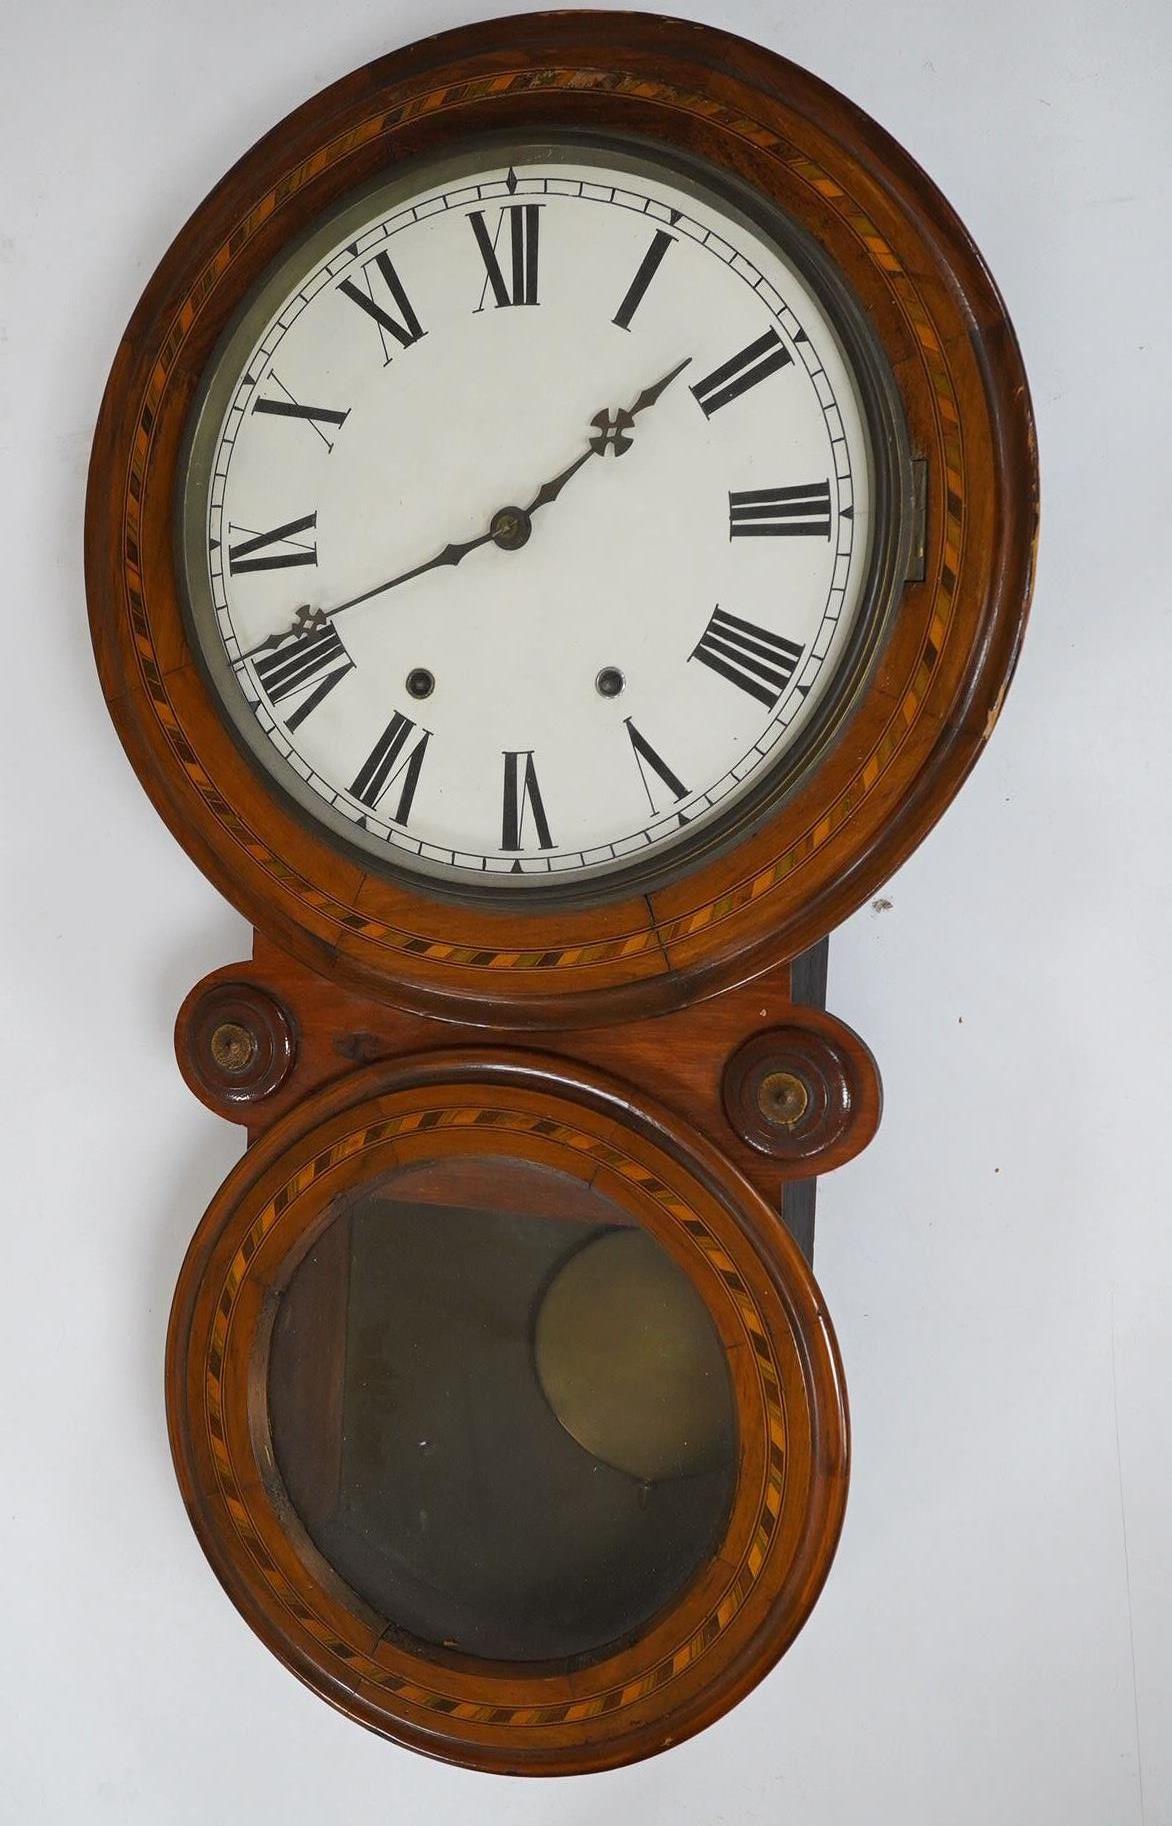 A late 19th century parquetry inlaid wall clock with Roman numeral dial, 73cm high. Condition - fair to good